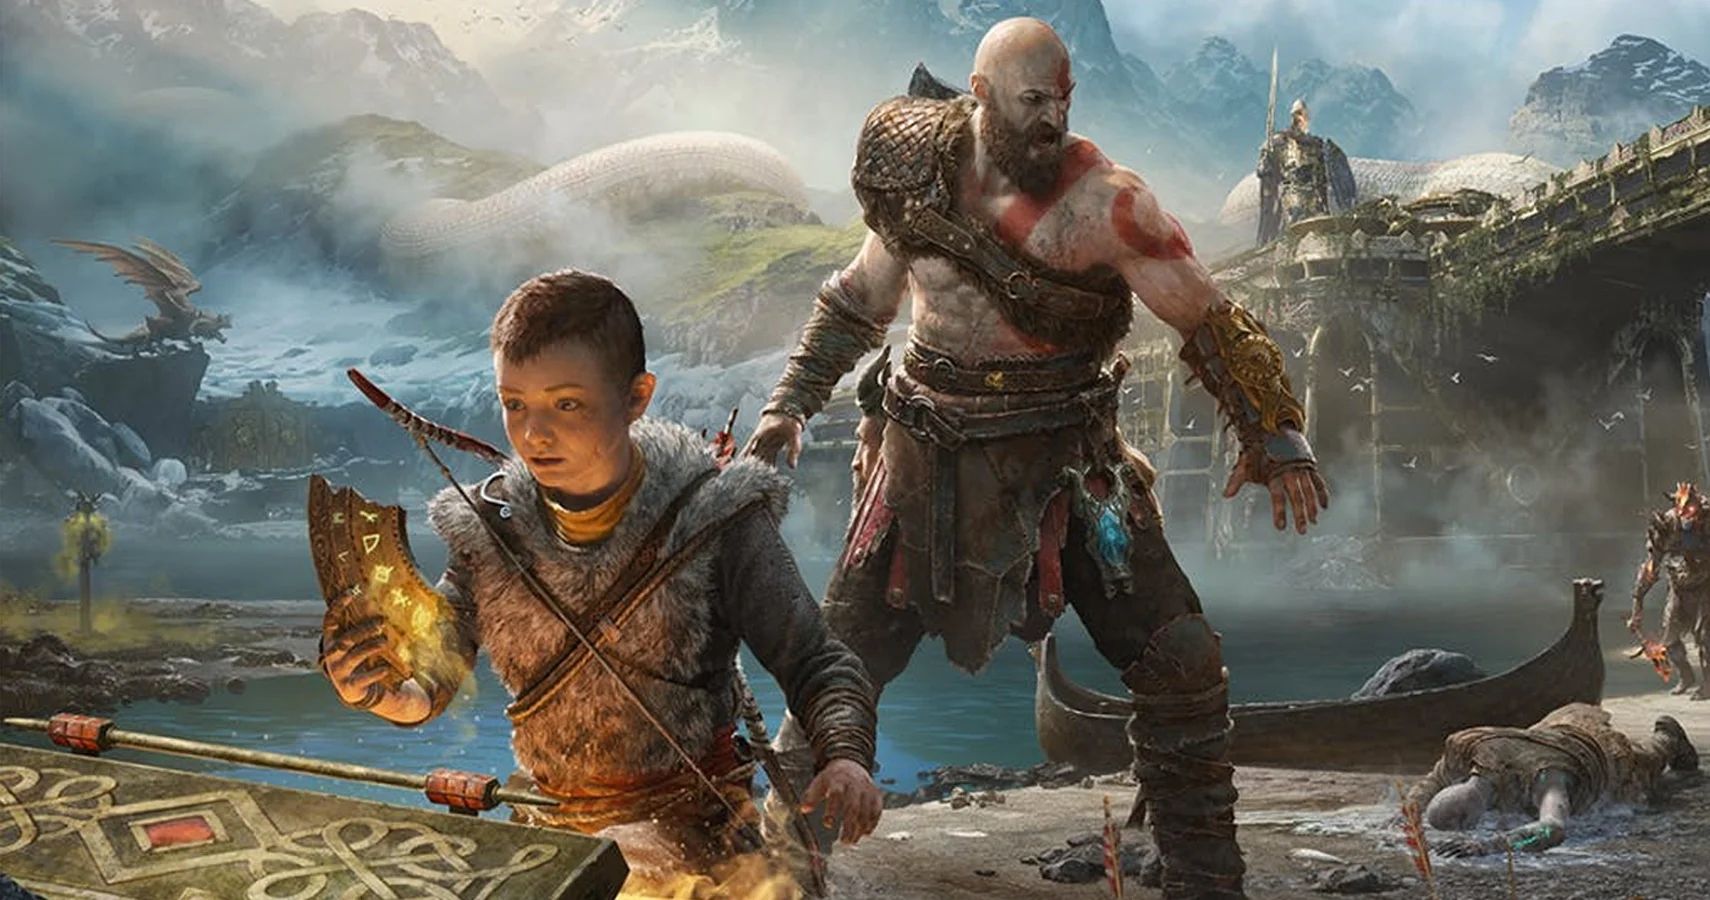 God Of War PS4: 10 Tips & Tricks The Game Doesn't Tell You – Page 2